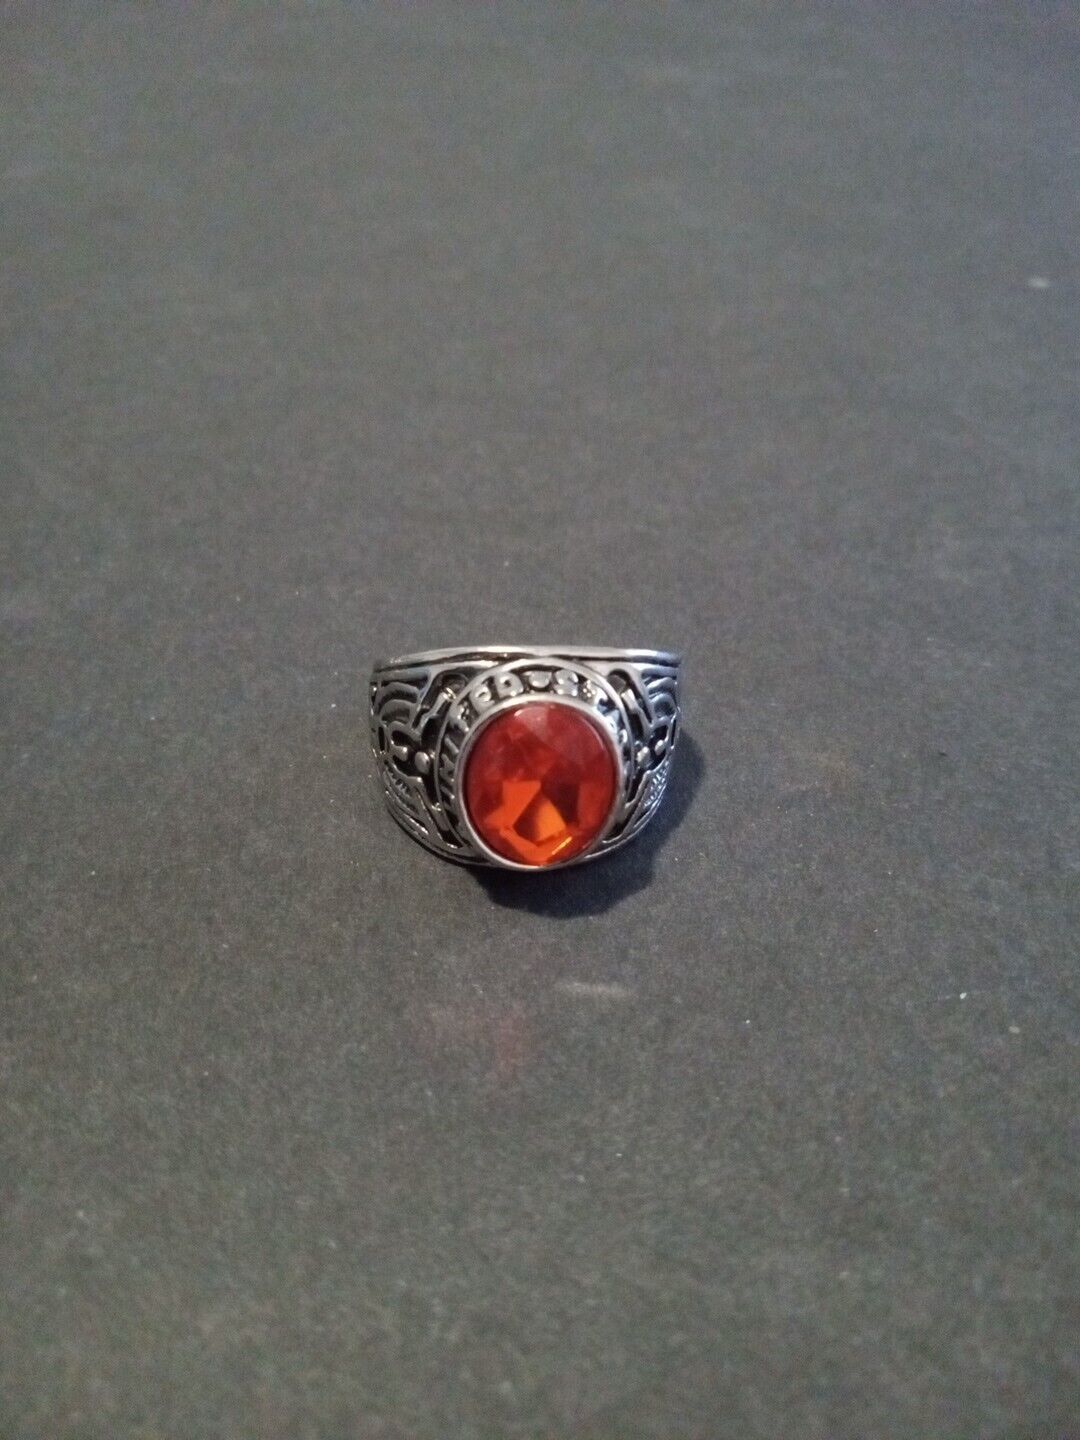 Vintage United States Army Ring Size 11 Silver Sterling Silver Red Stone